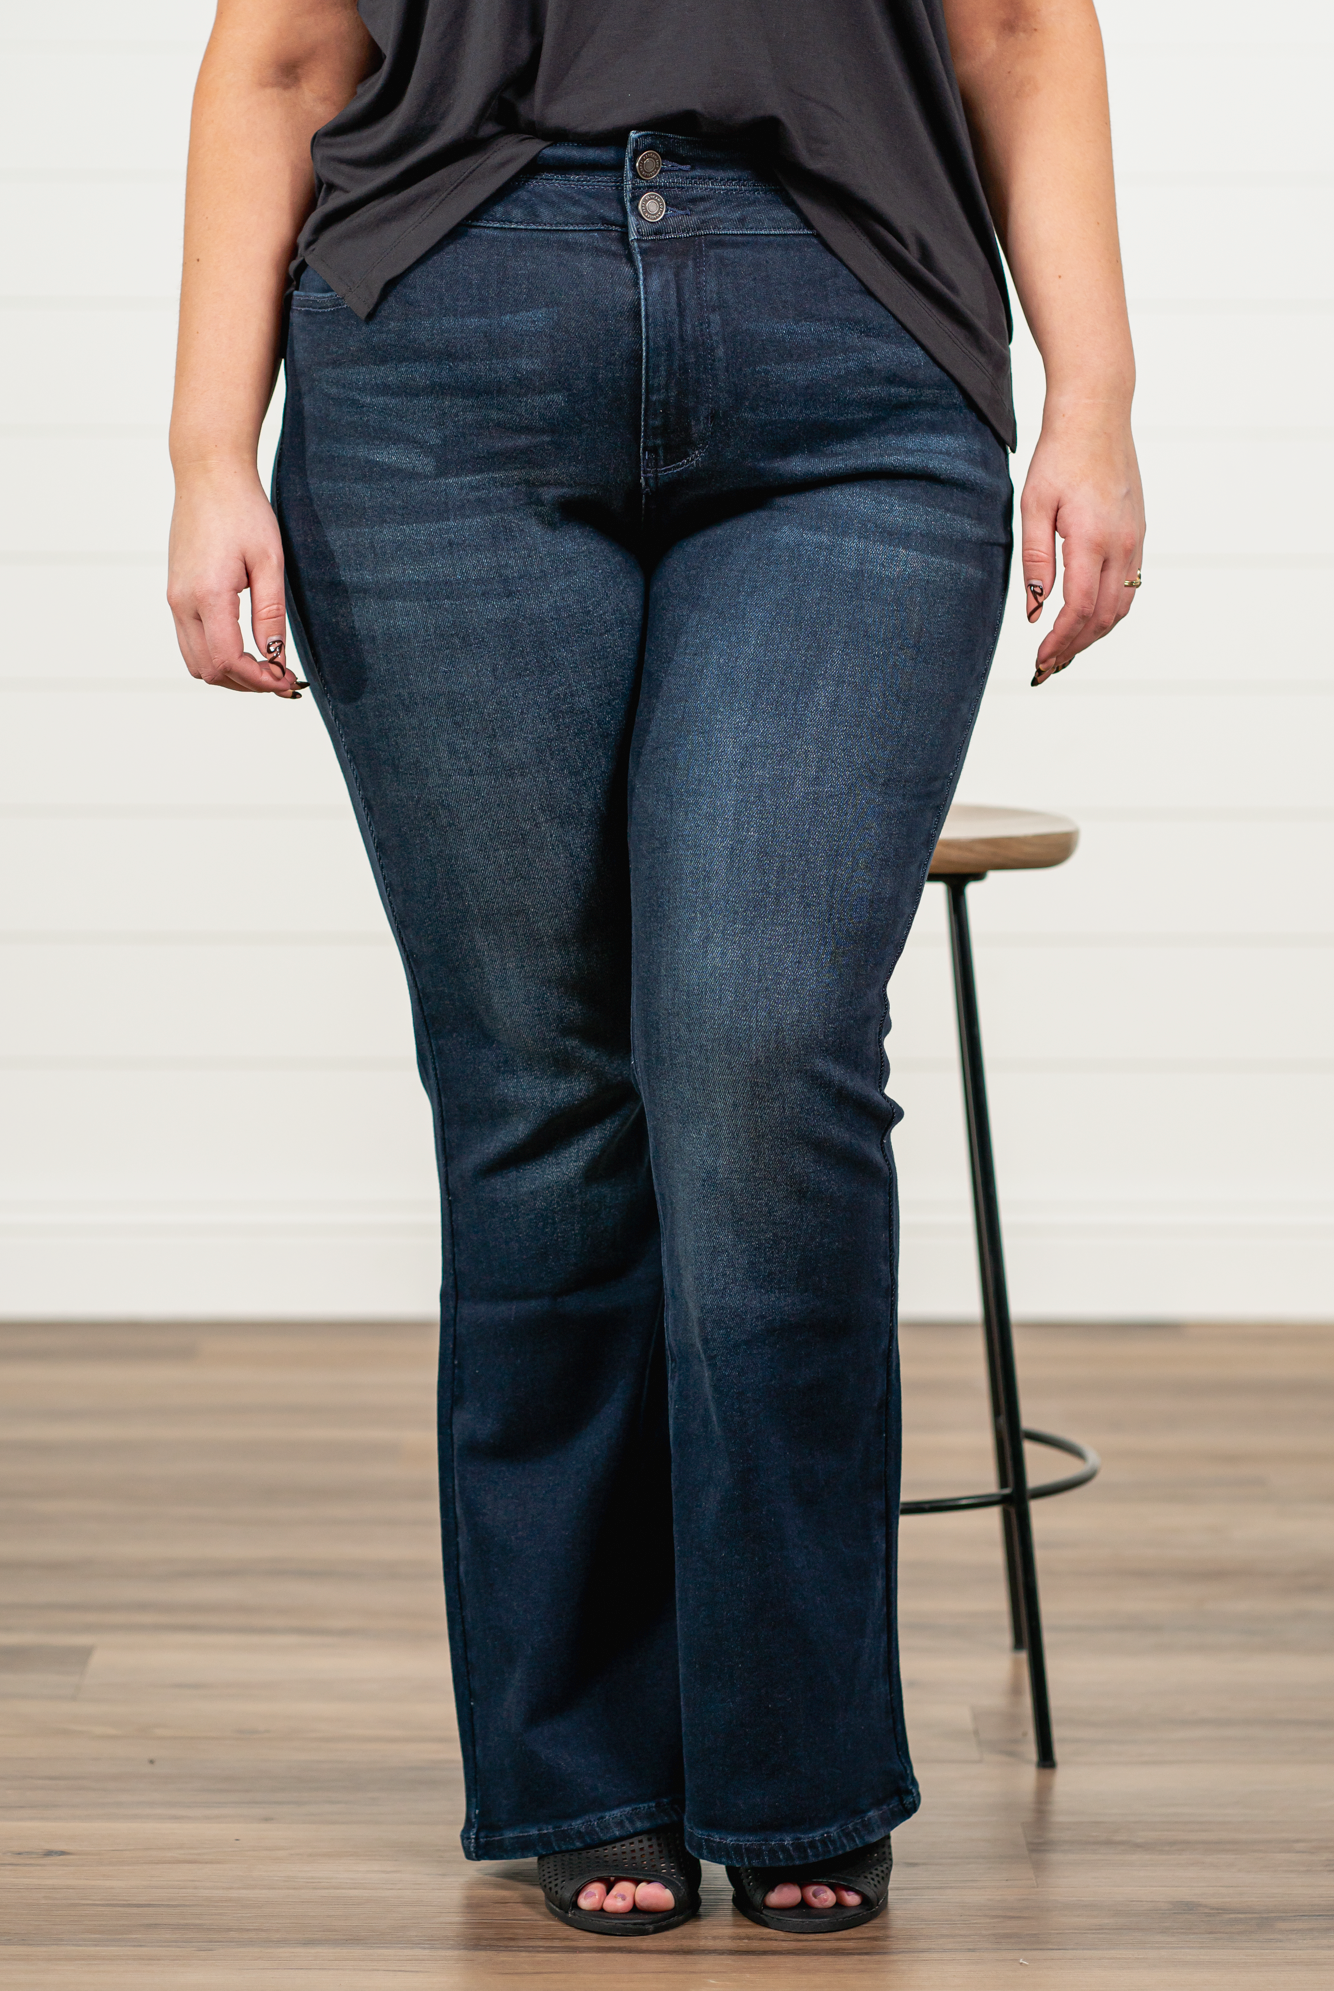 KanCan Jeans   KanCan Plus Size Guide:   XL-16 2XL-18 3XL-20  Color: Dark Wash Cut: Flare Cut, 34" Inseam* Rise: High-Rise, 10.5" Front Rise* Material: 94% Cotton 4% Polyester2% Spandex Detail: Whisker Wash Fly: Zipper Fly with Double Button Closure Style #: KC7123D-P Contact us for any additional measurements or sizing.  *Measured on the smallest size, measurements may vary by size.